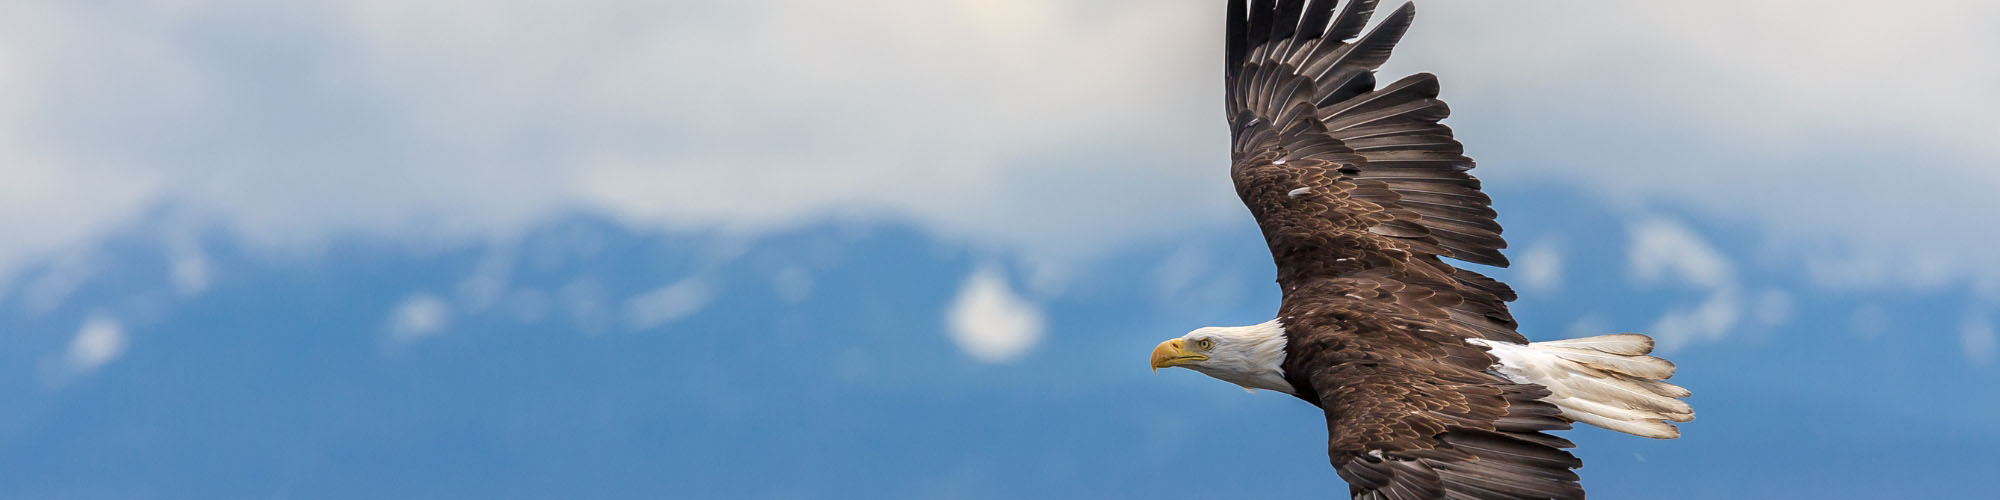 A bald eagle with wings fully spread flying from right to left in front of snowy mountains